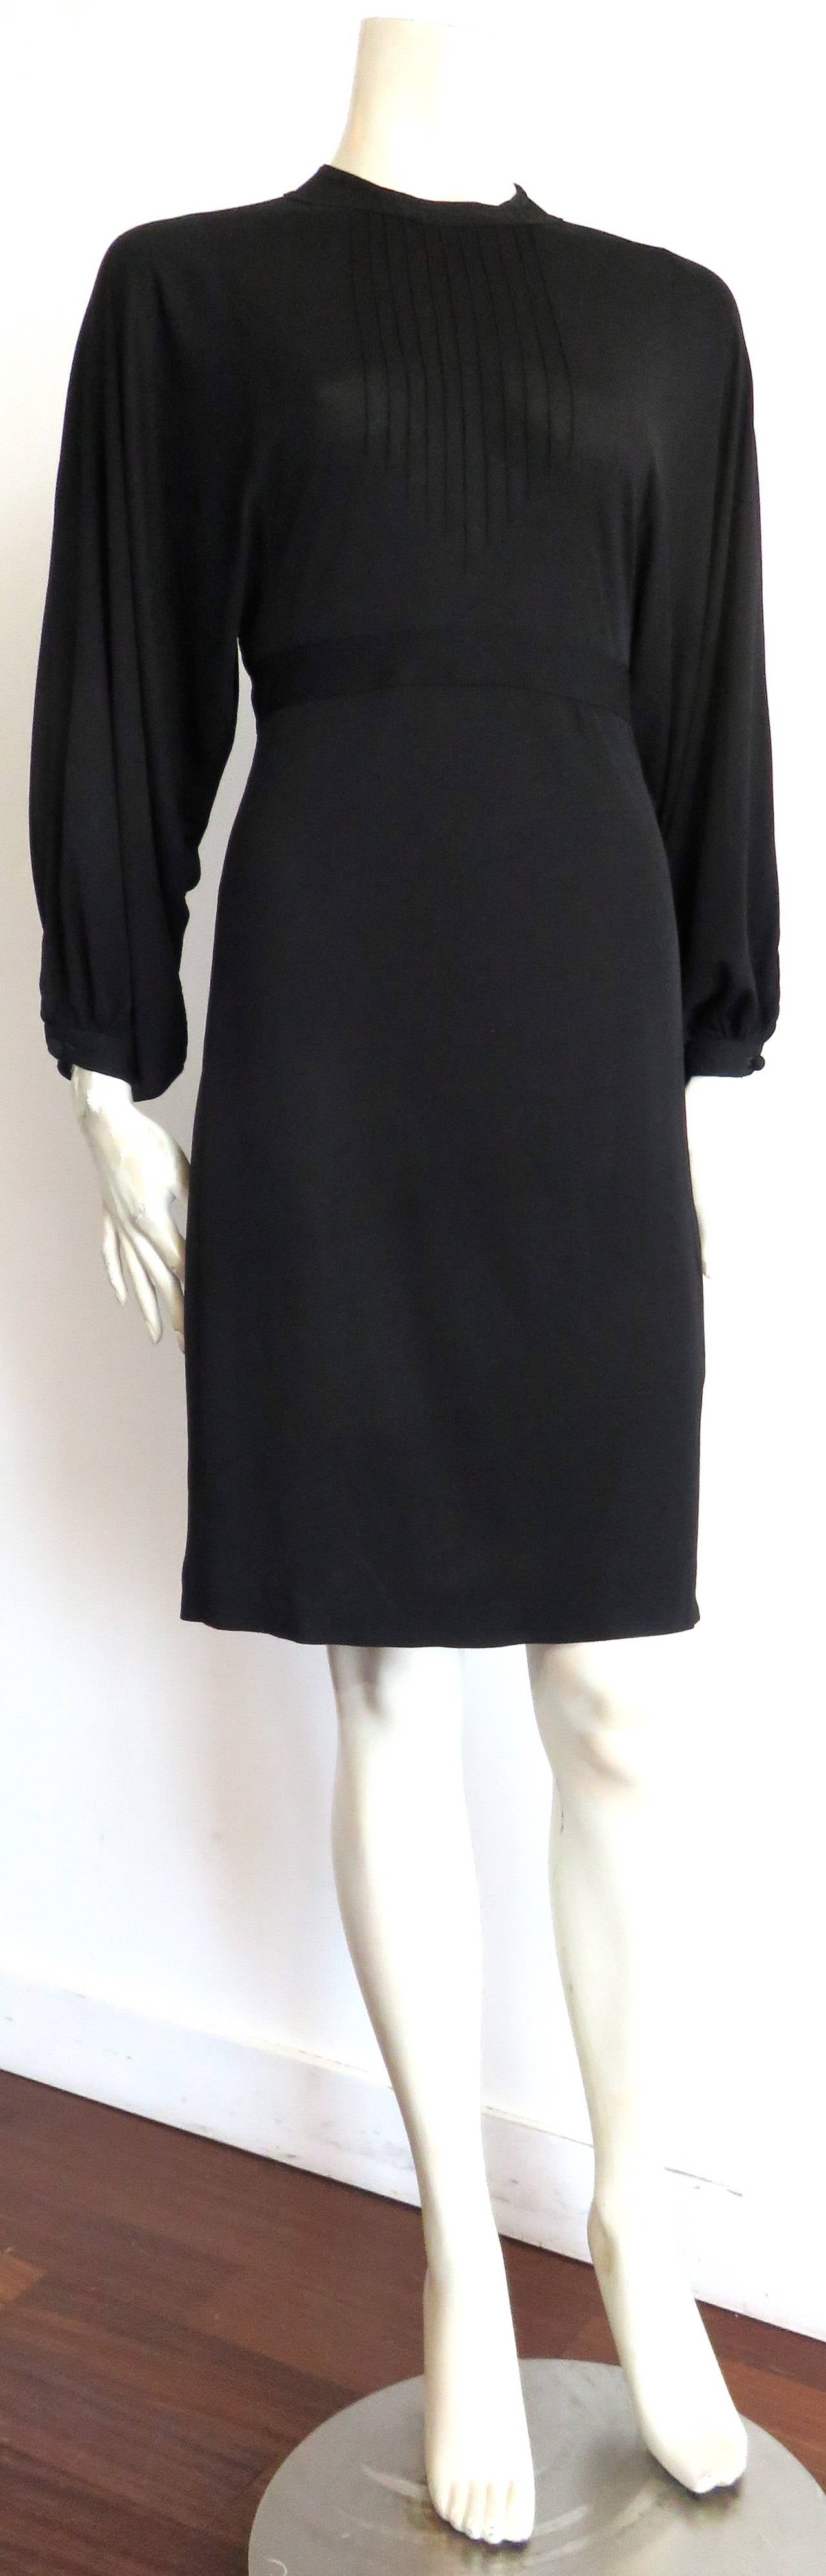 1970's JEAN MUIR Pin-tucked LBD dress In Excellent Condition For Sale In Newport Beach, CA